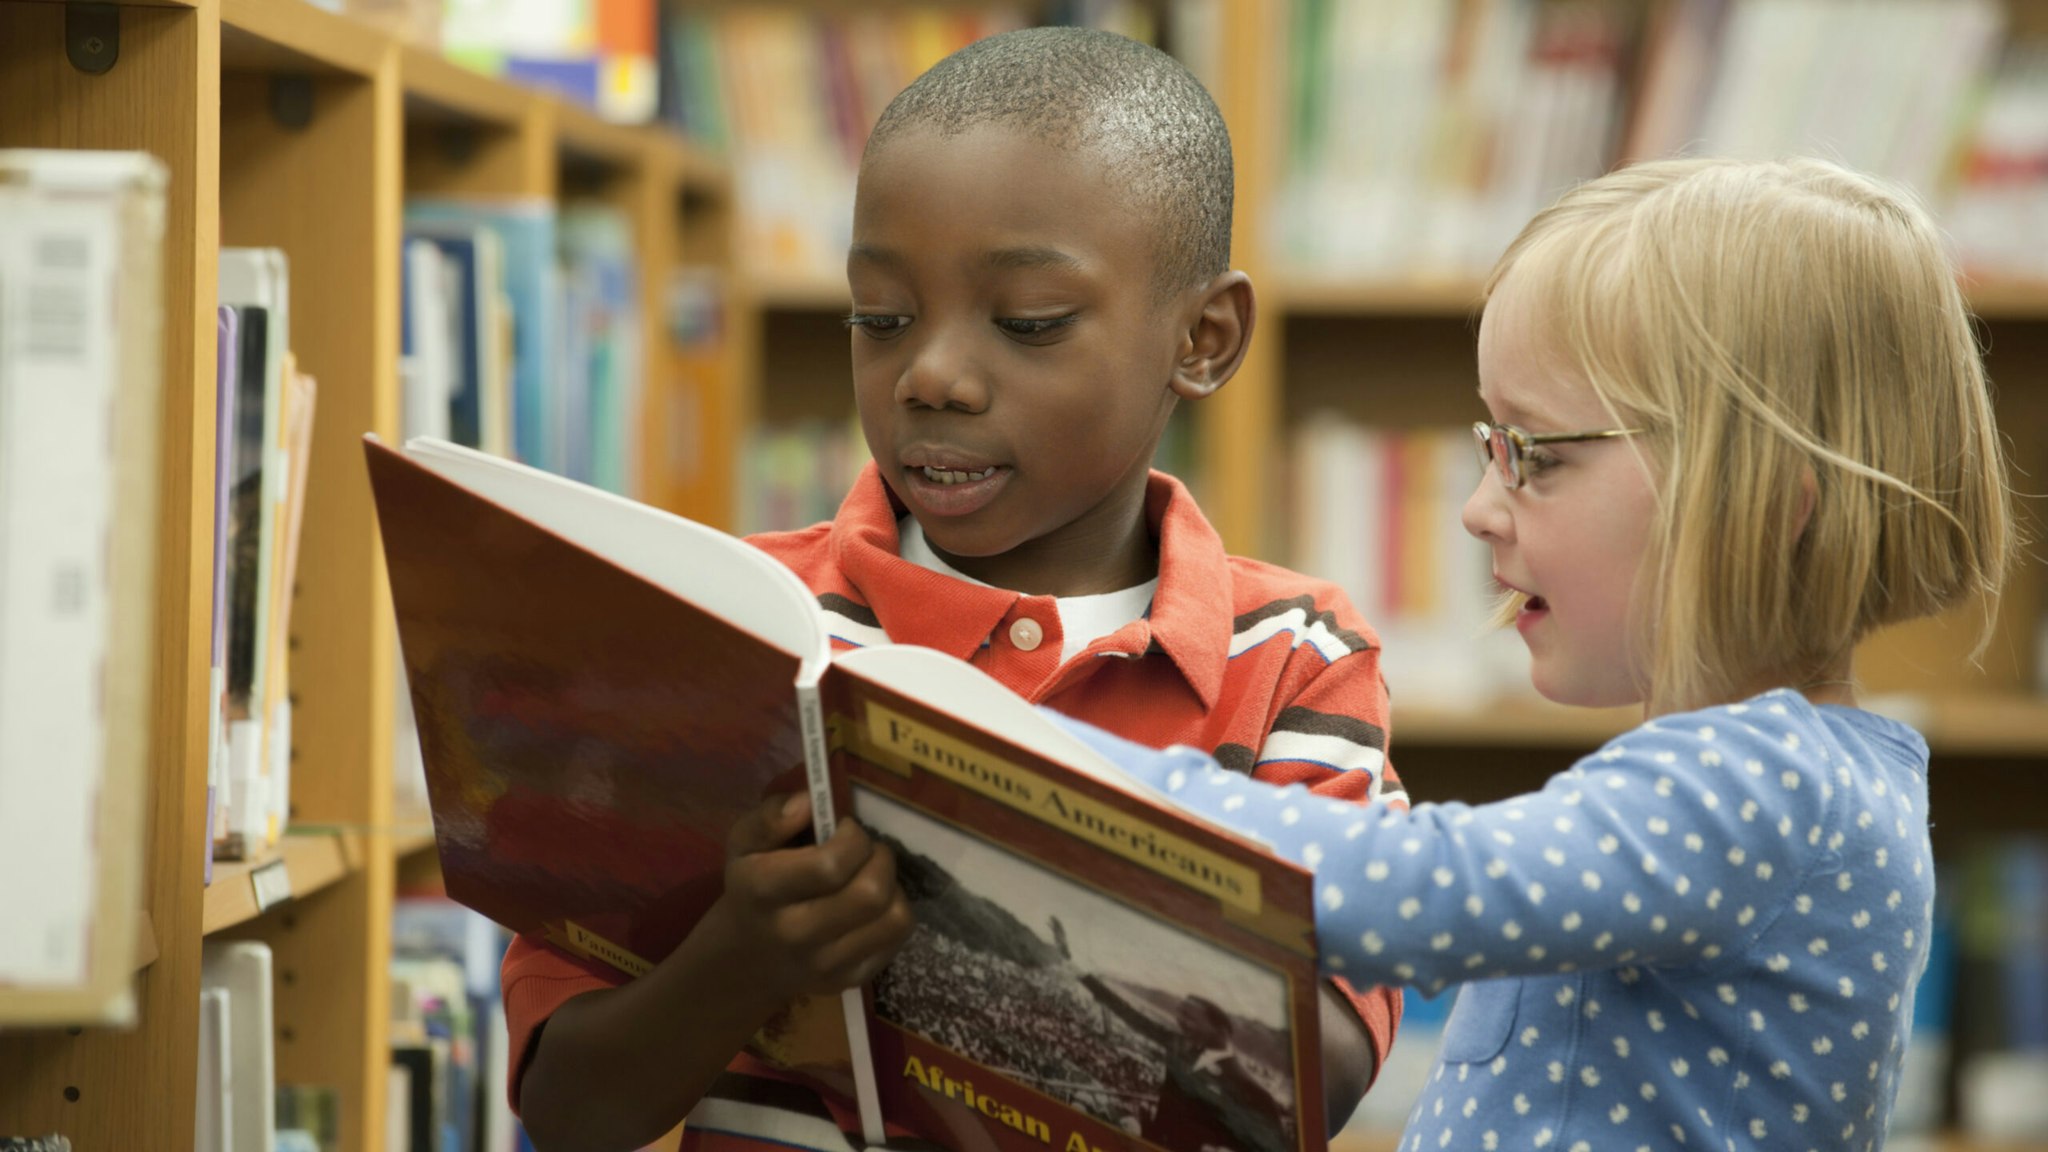 Boy and girl classmates sharing book in library